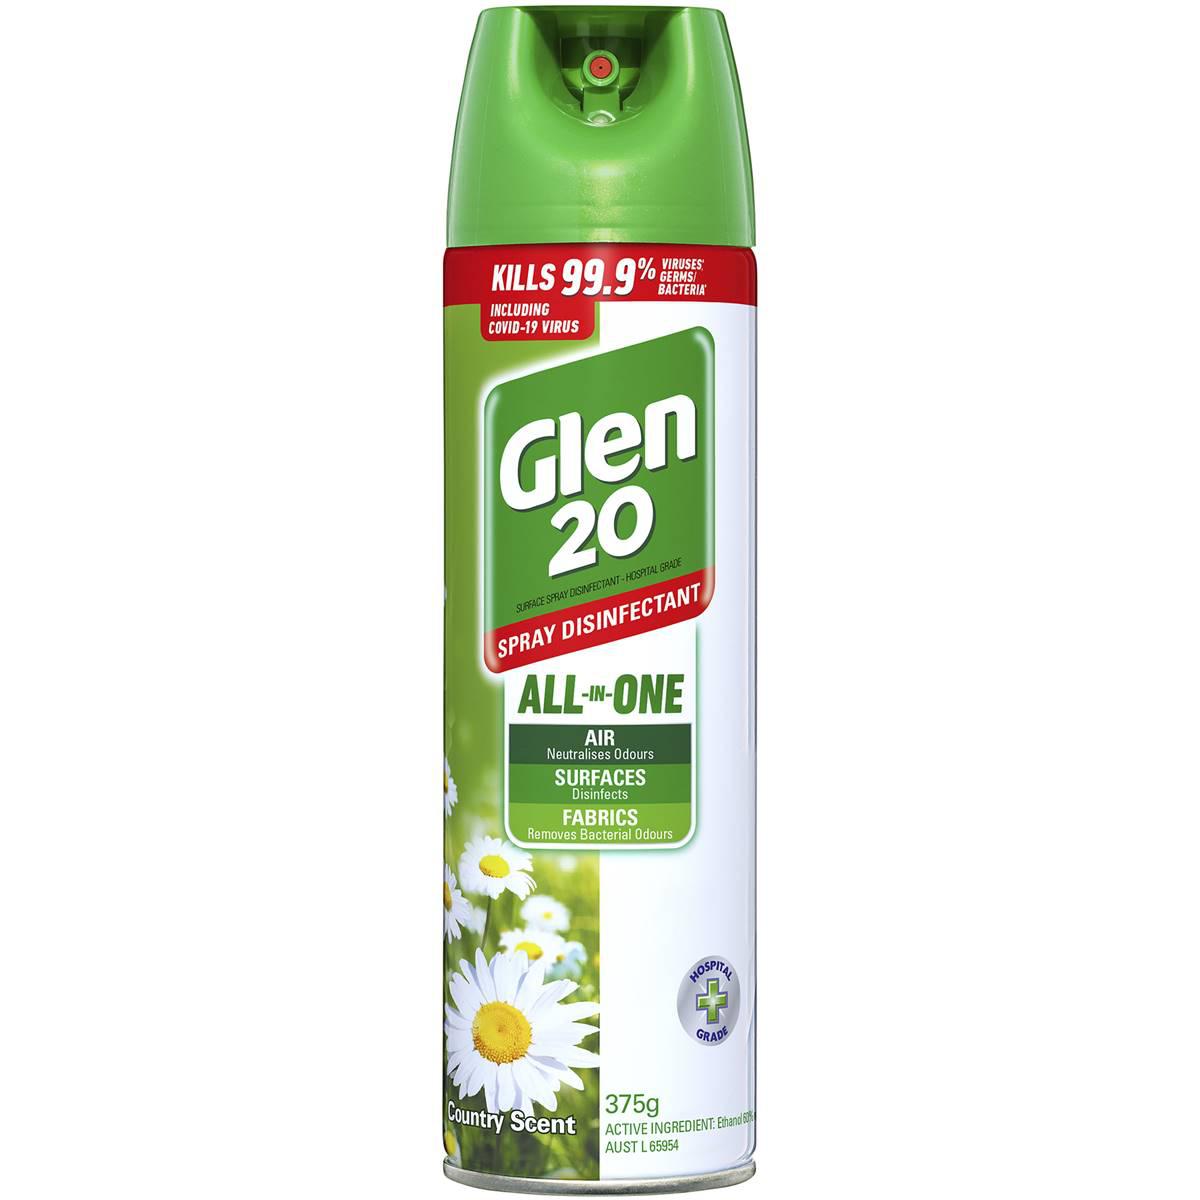 Glen 20 Disinfectant Spray All-in-one Country Scent 375g